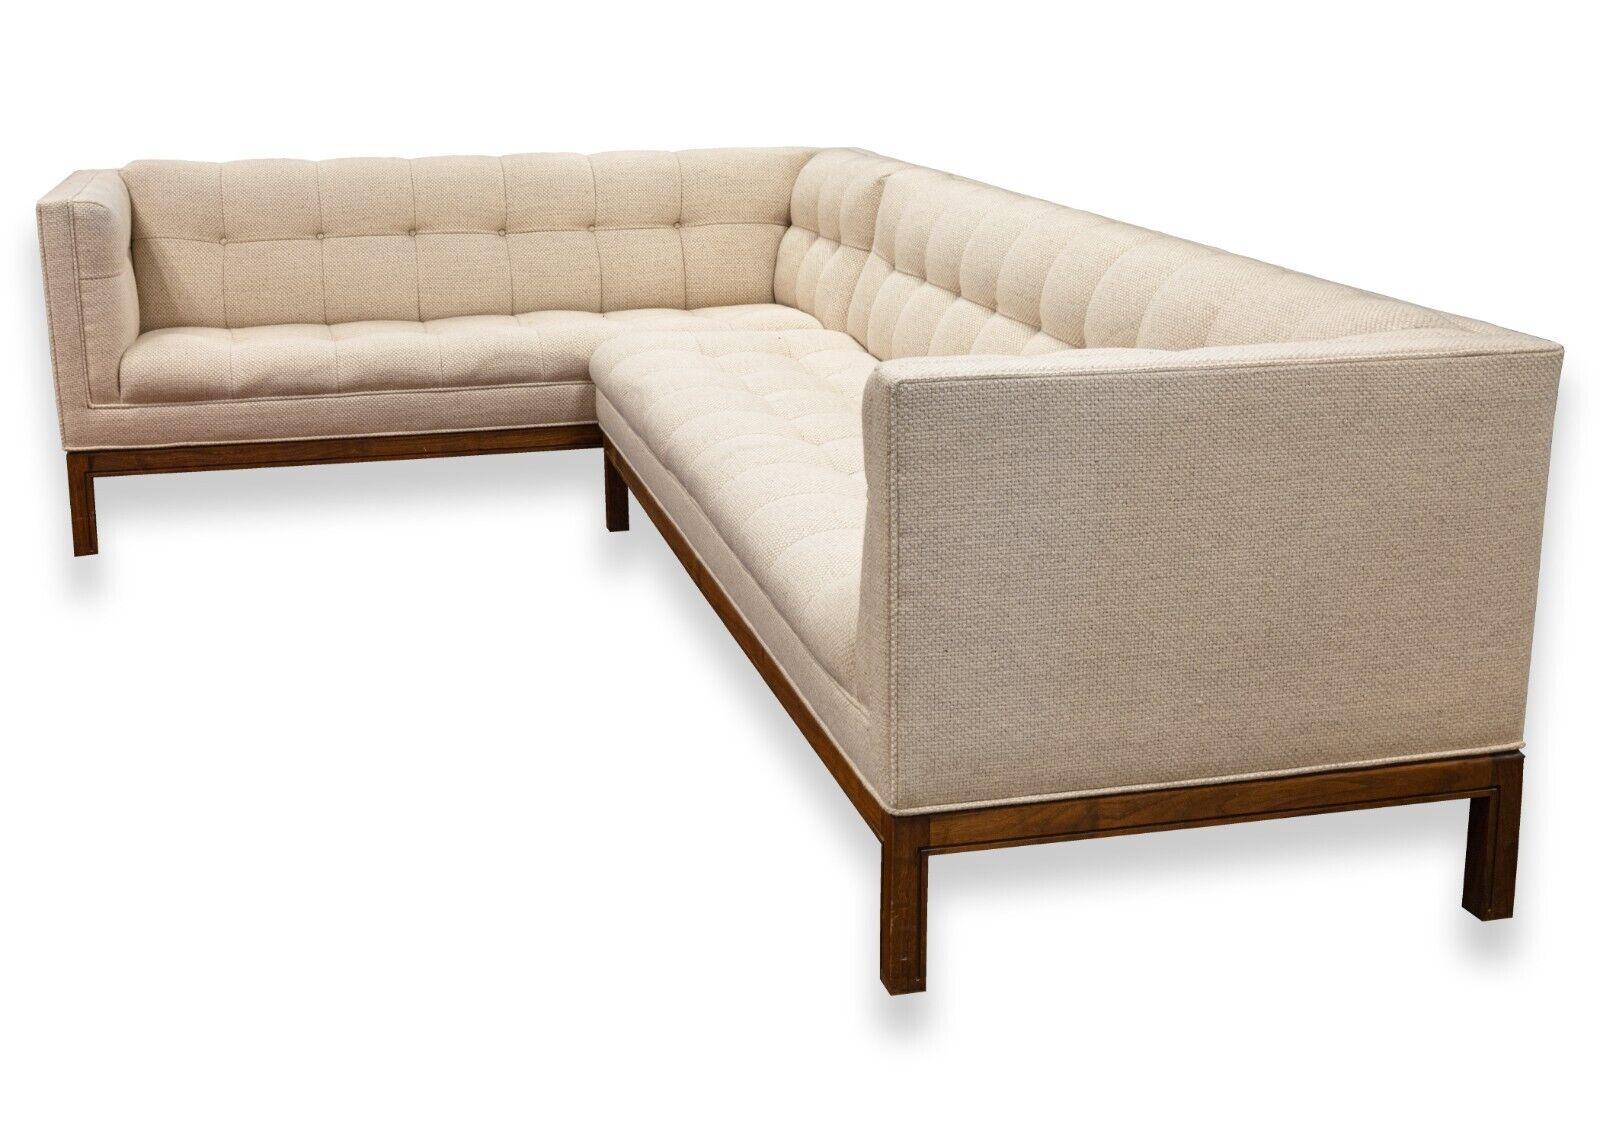 A Metropolitan cream sofa sectional. A lovely sofa sectional from San Francisco based furniture brand Metropolitan. This sofa sectional features a two piece L-design. The upholstery features a beautiful tufted cushion design on both the seat and the